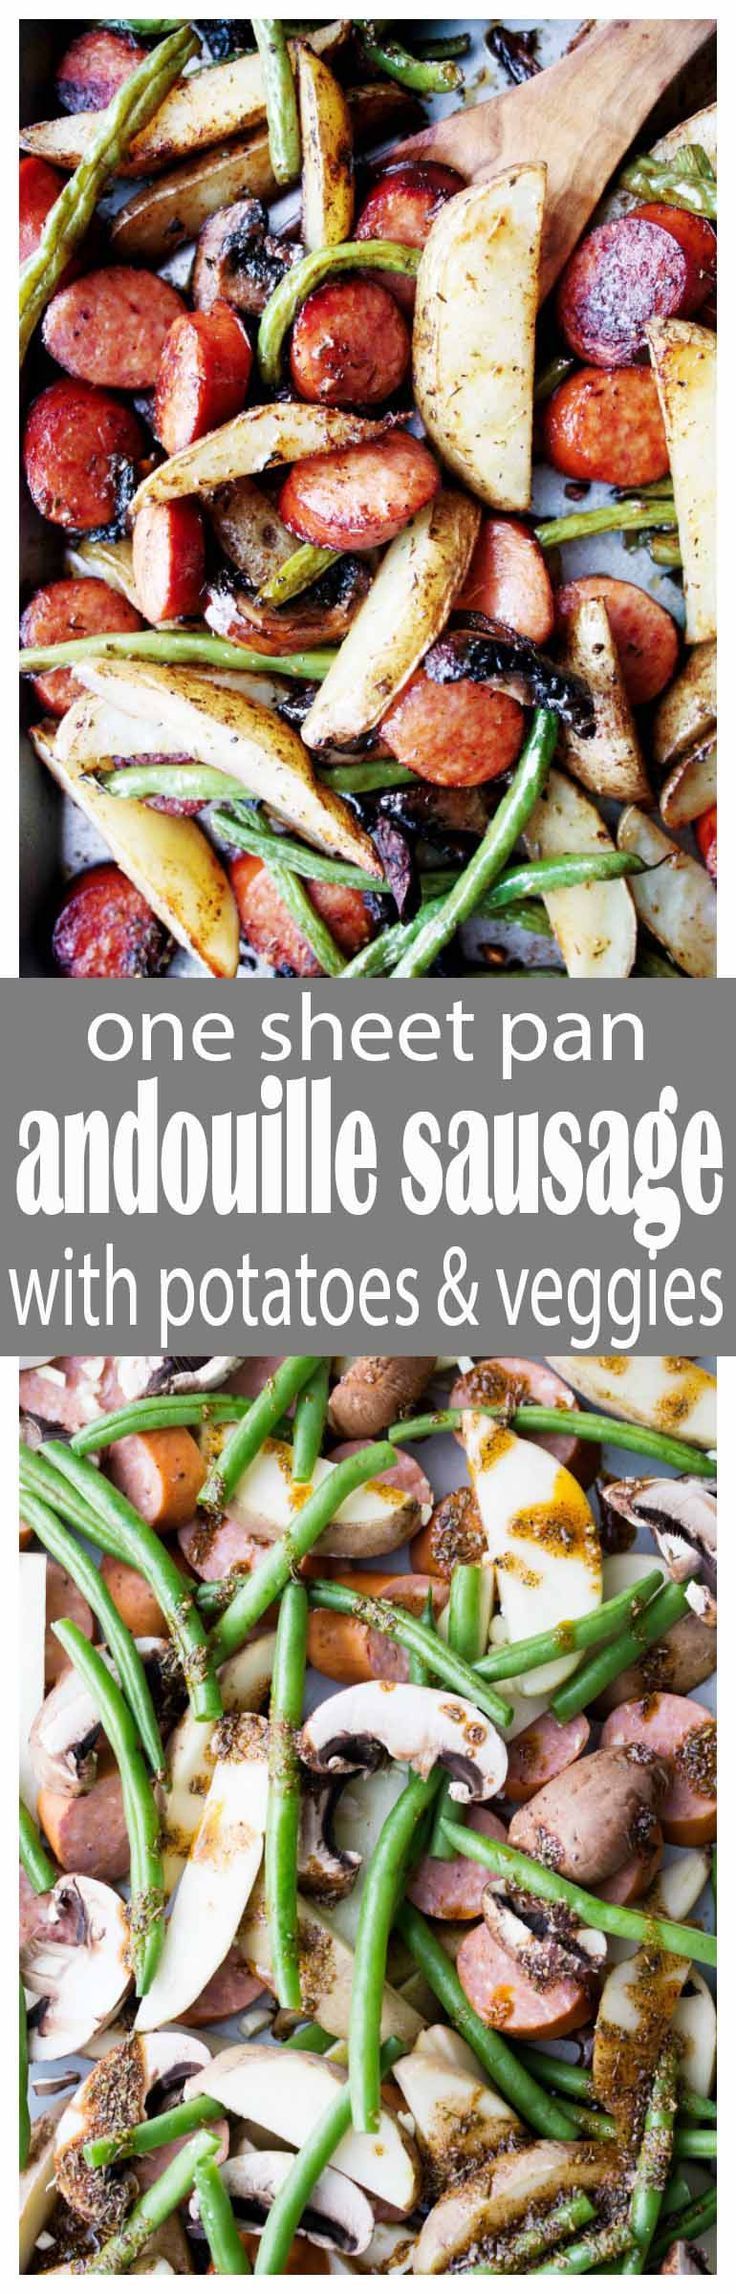 Sheet Pan Andouille Sausage with Potatoes and Veggies – Deliciously seasoned andouille sausage, potatoes, and veggies, all